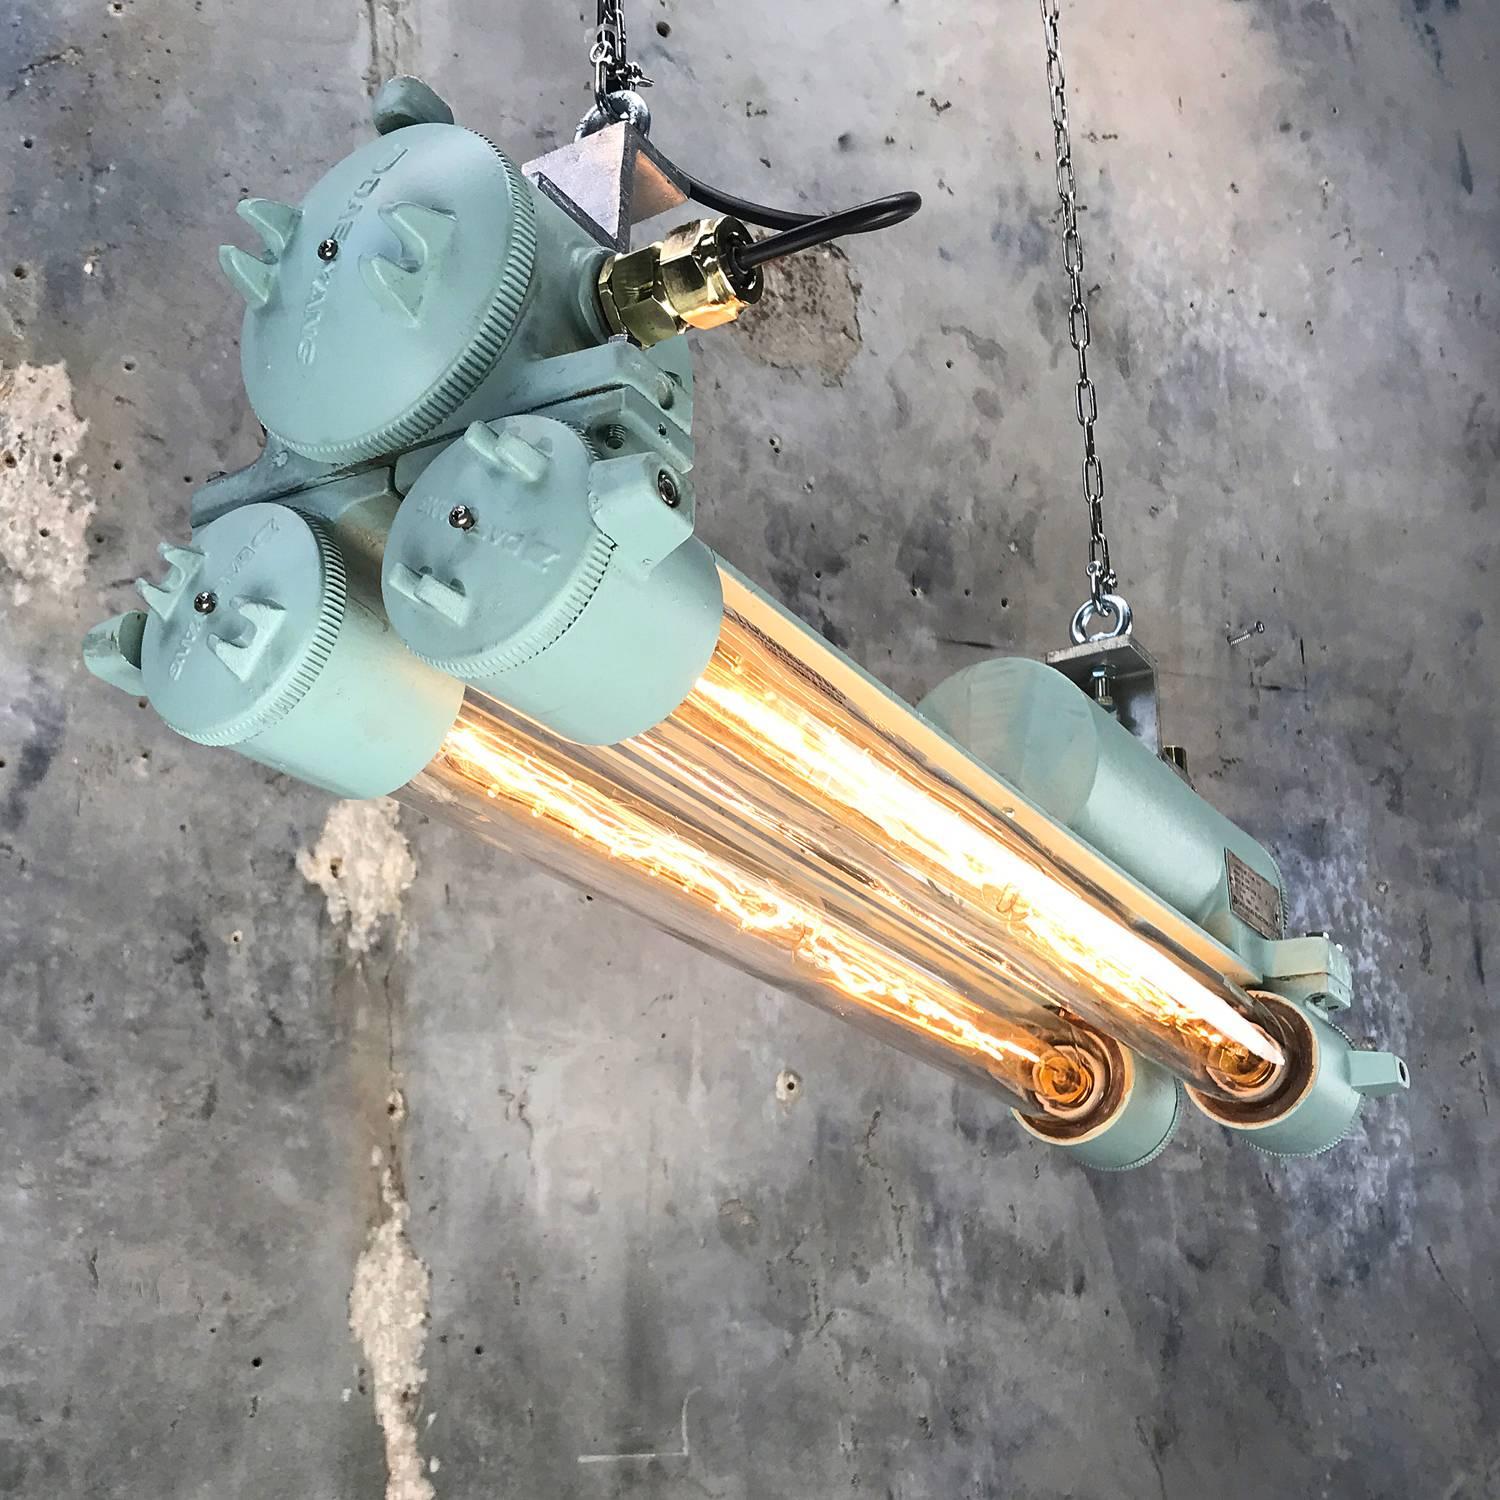 Reclaimed vintage industrial Korean flameproof striplight made by Daeyang in the 1970's painted in duck egg.
 
Original item salvaged from supertankers and military vessels then professionally restored by Loomlight in the UK ready for installation